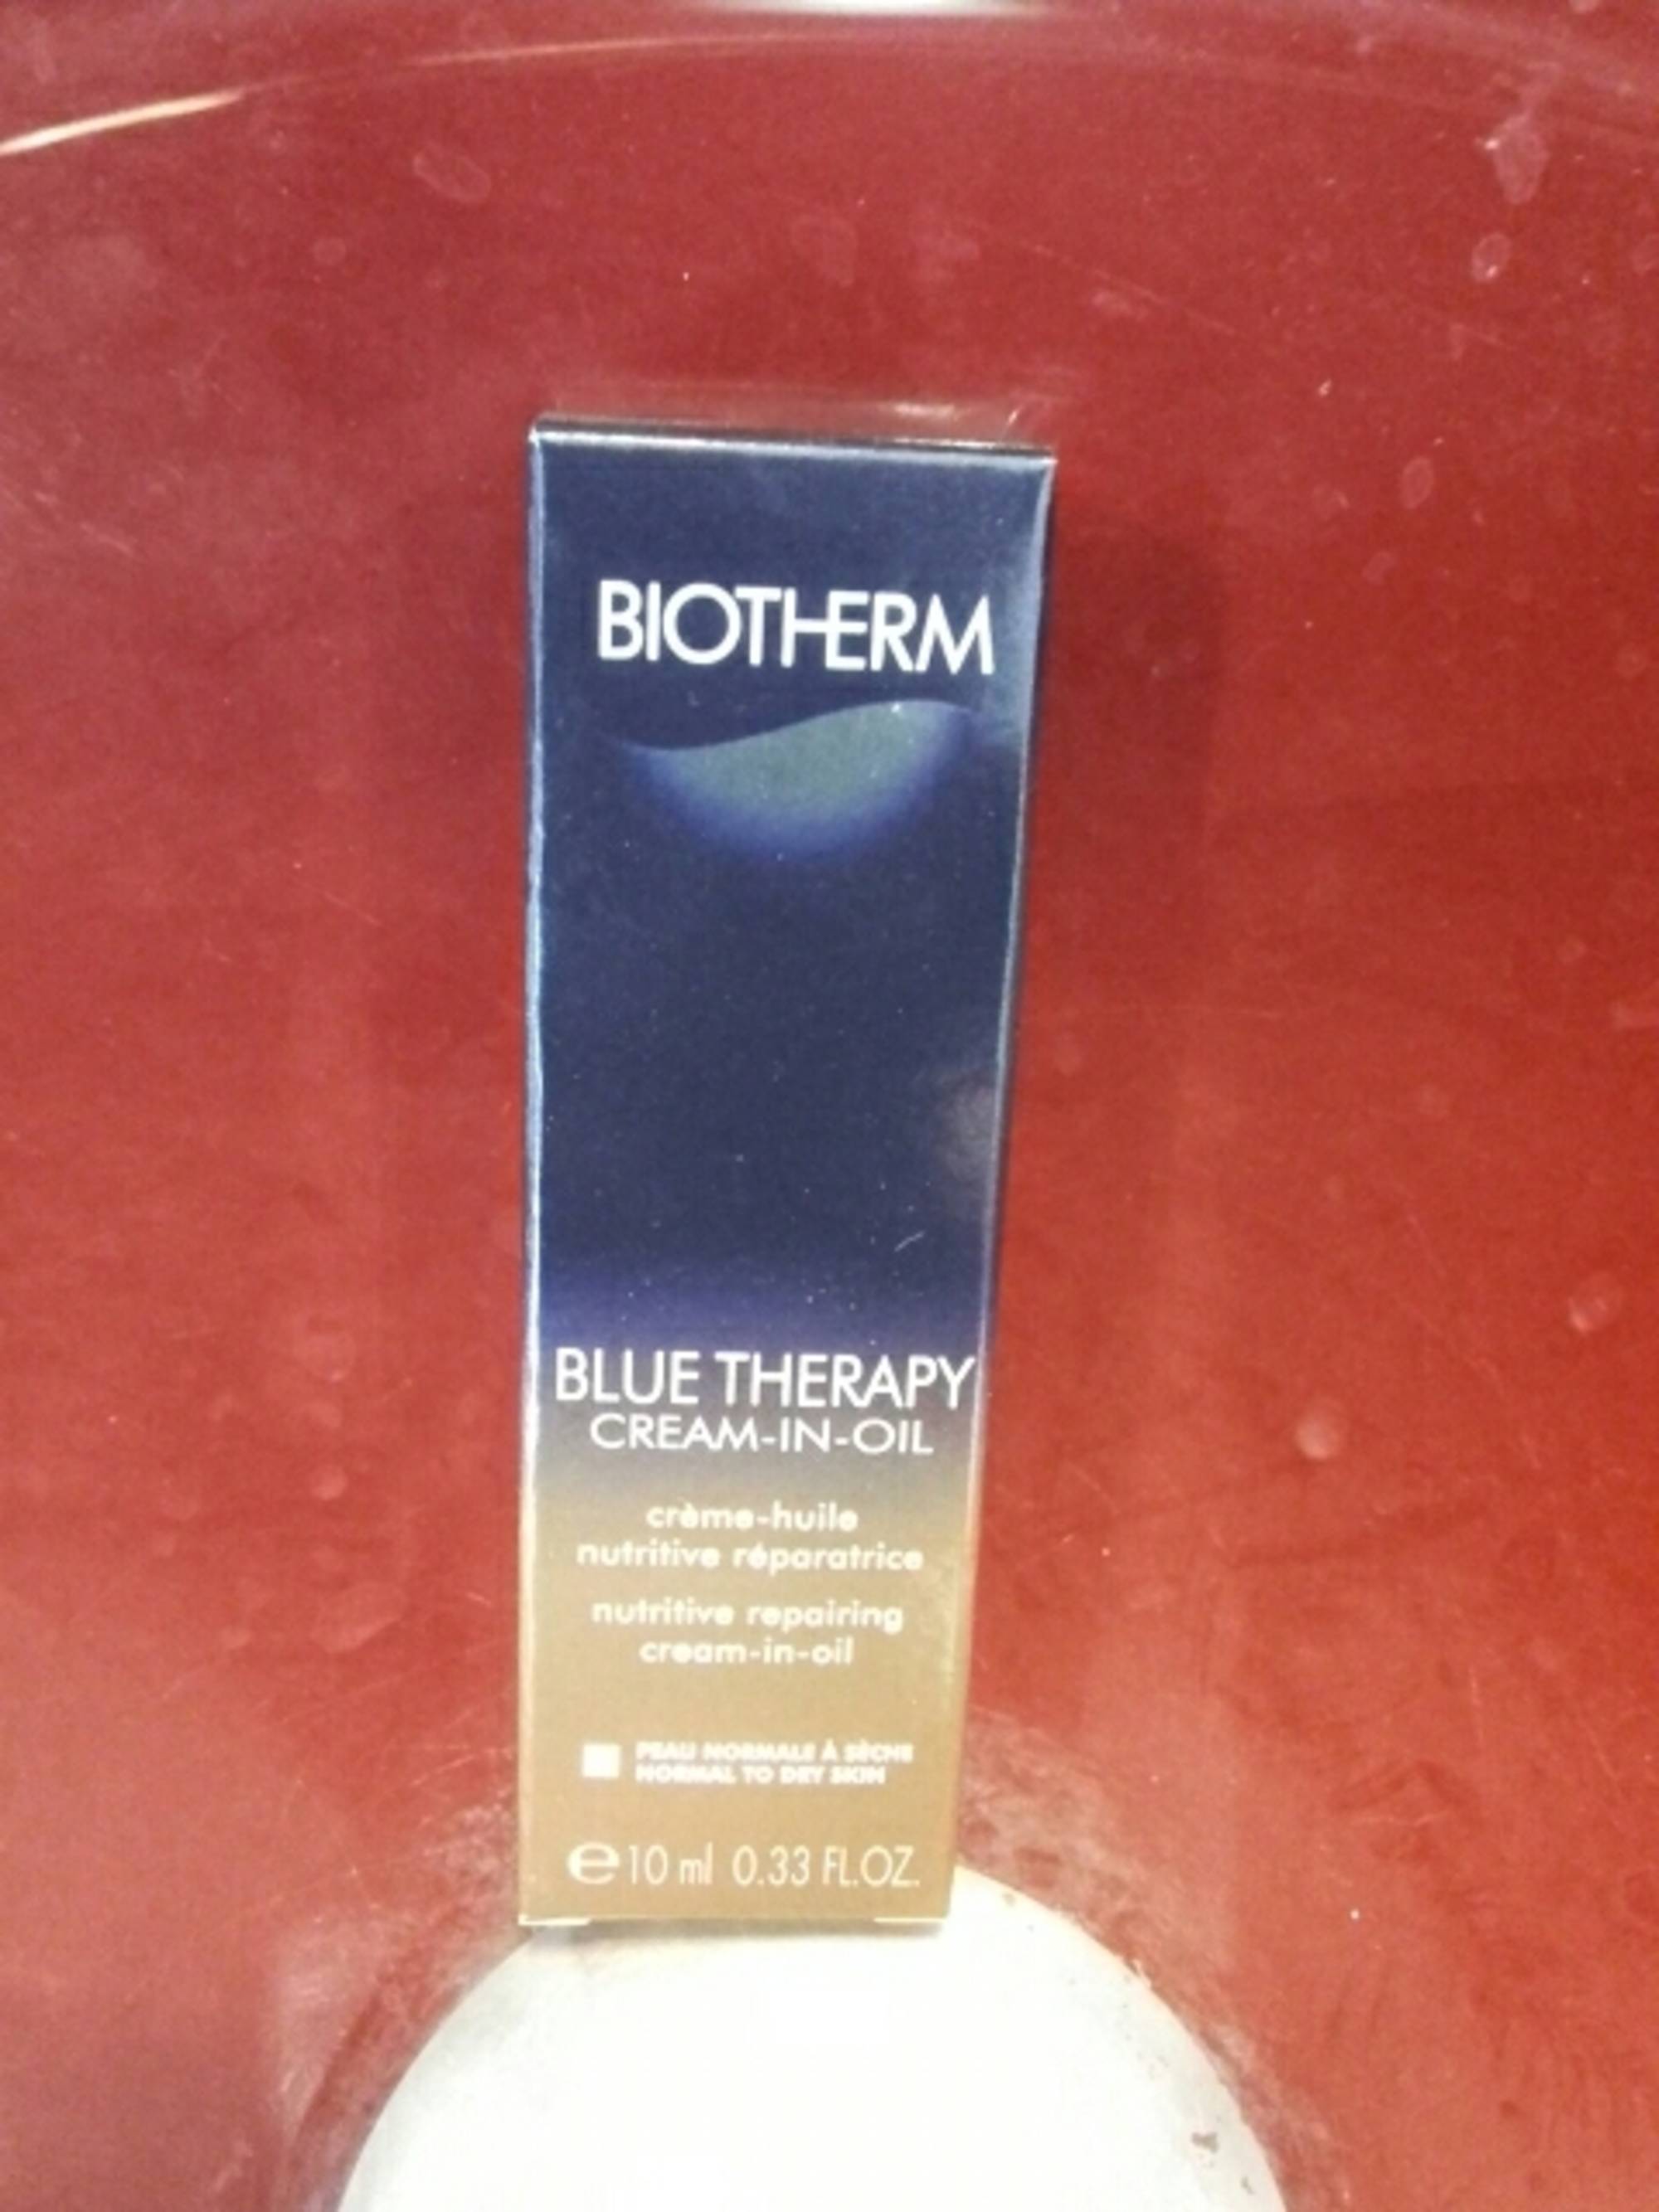 BIOTHERM - Blue therapy cream-in-oil - Crème-huile nutritive réparatrice